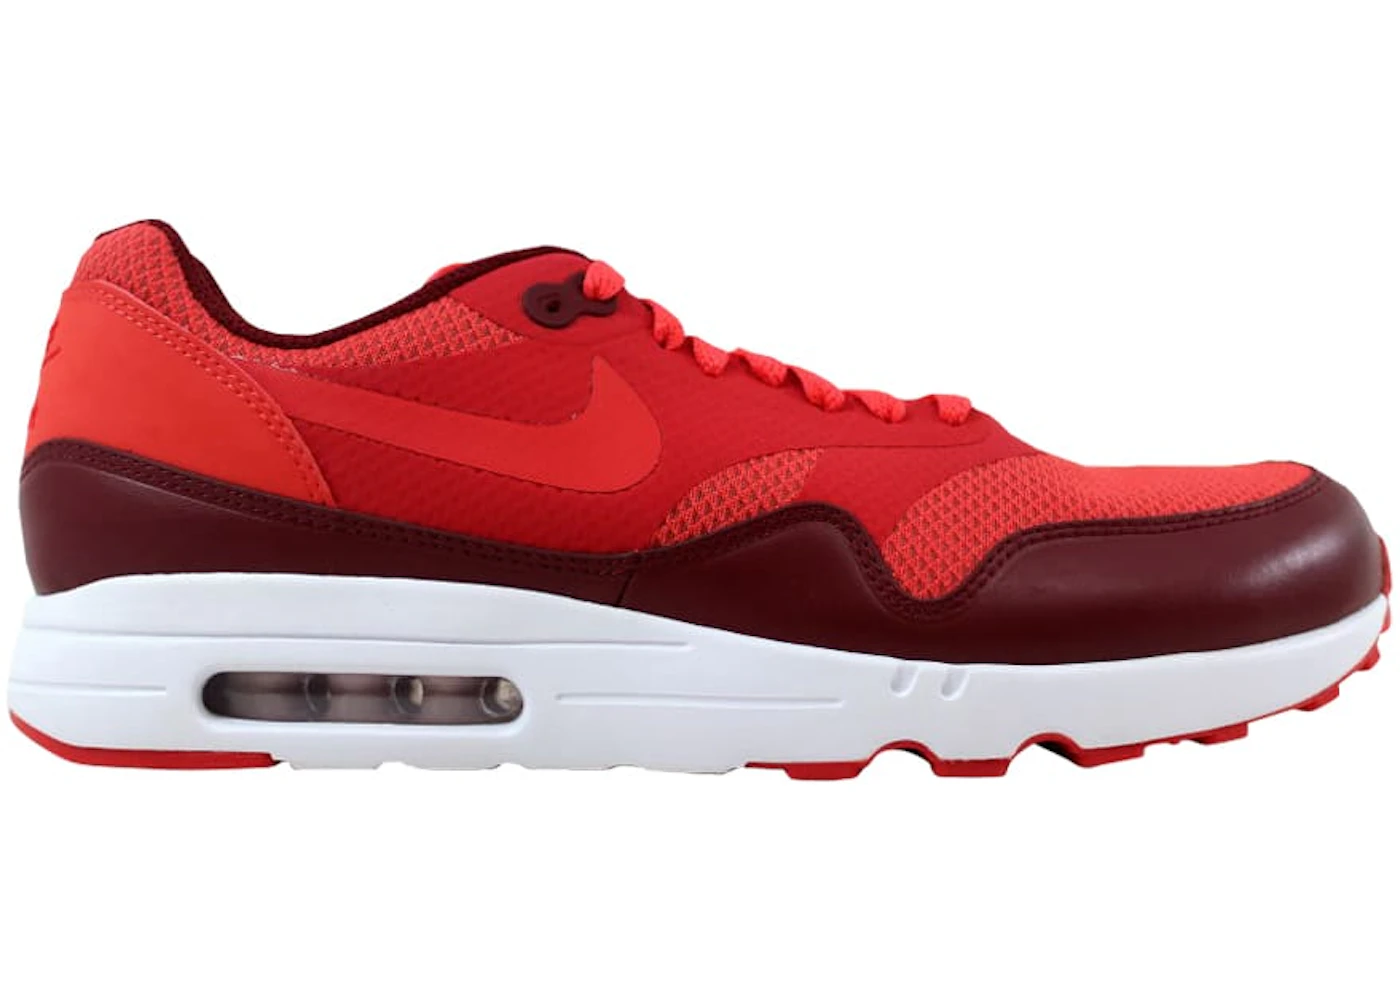 Nike Air Max 1 Ultra 2.0 Essential Red/Track Red-Team Red - 875679-601 US